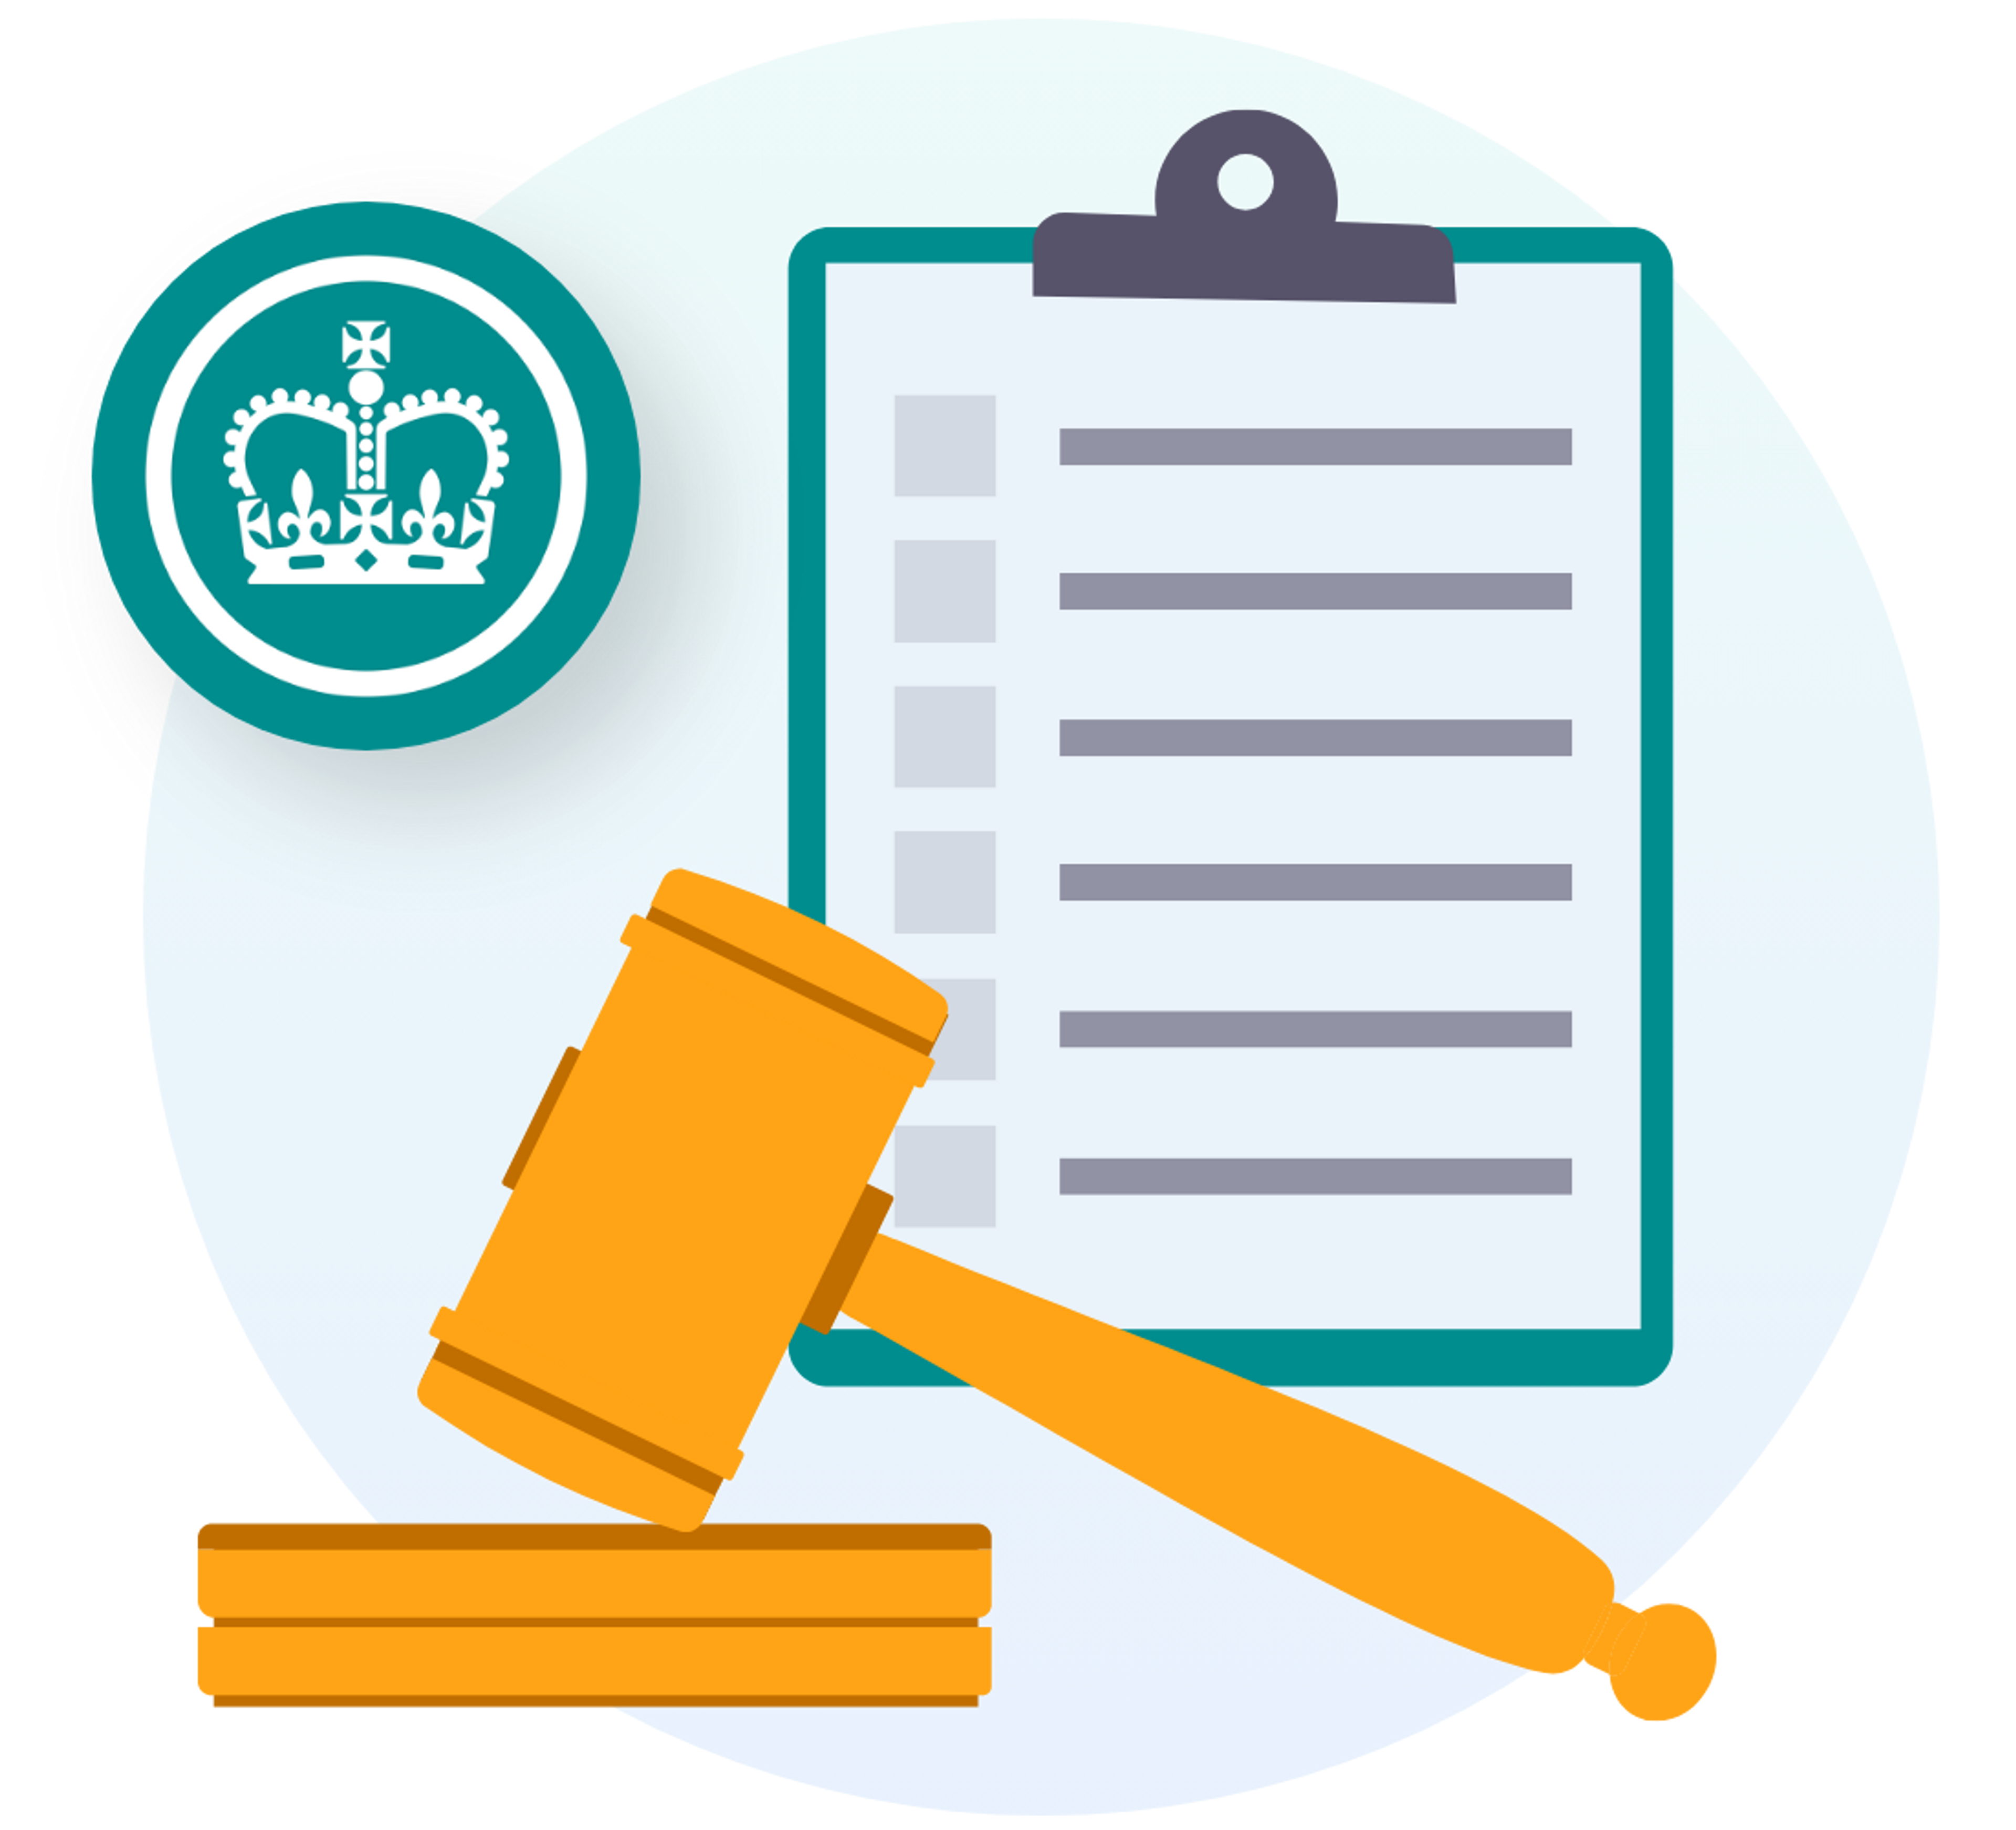 An illustration of a checklist and judge's gavel alongside the HMRC logo.